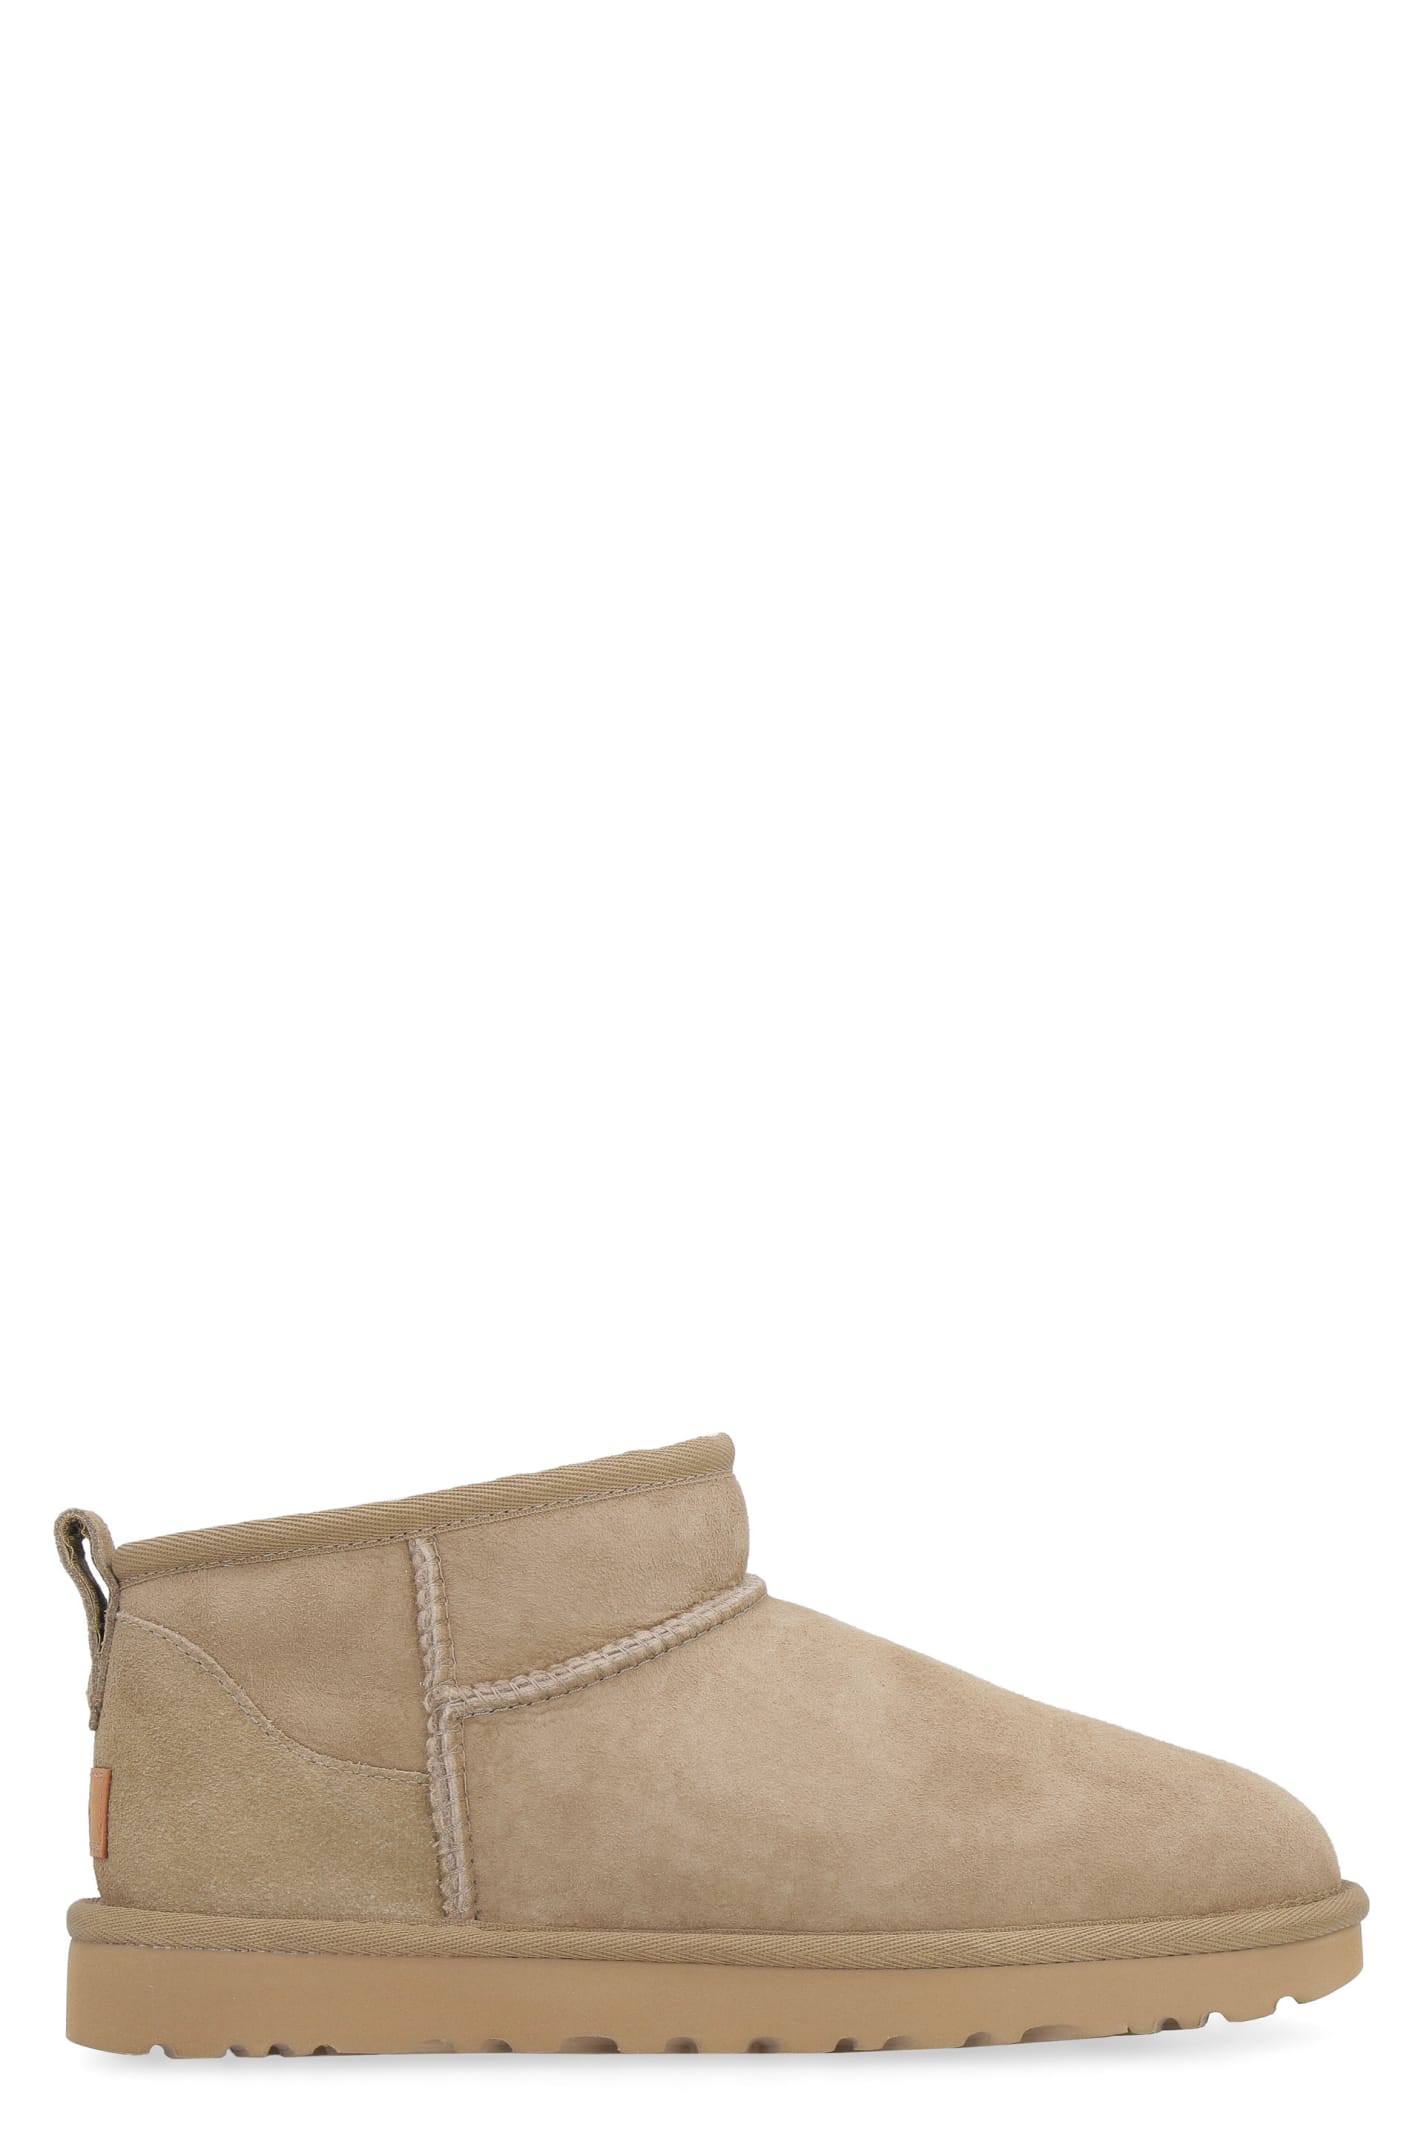 UGG Classic Ultra Mini Ankle Boots